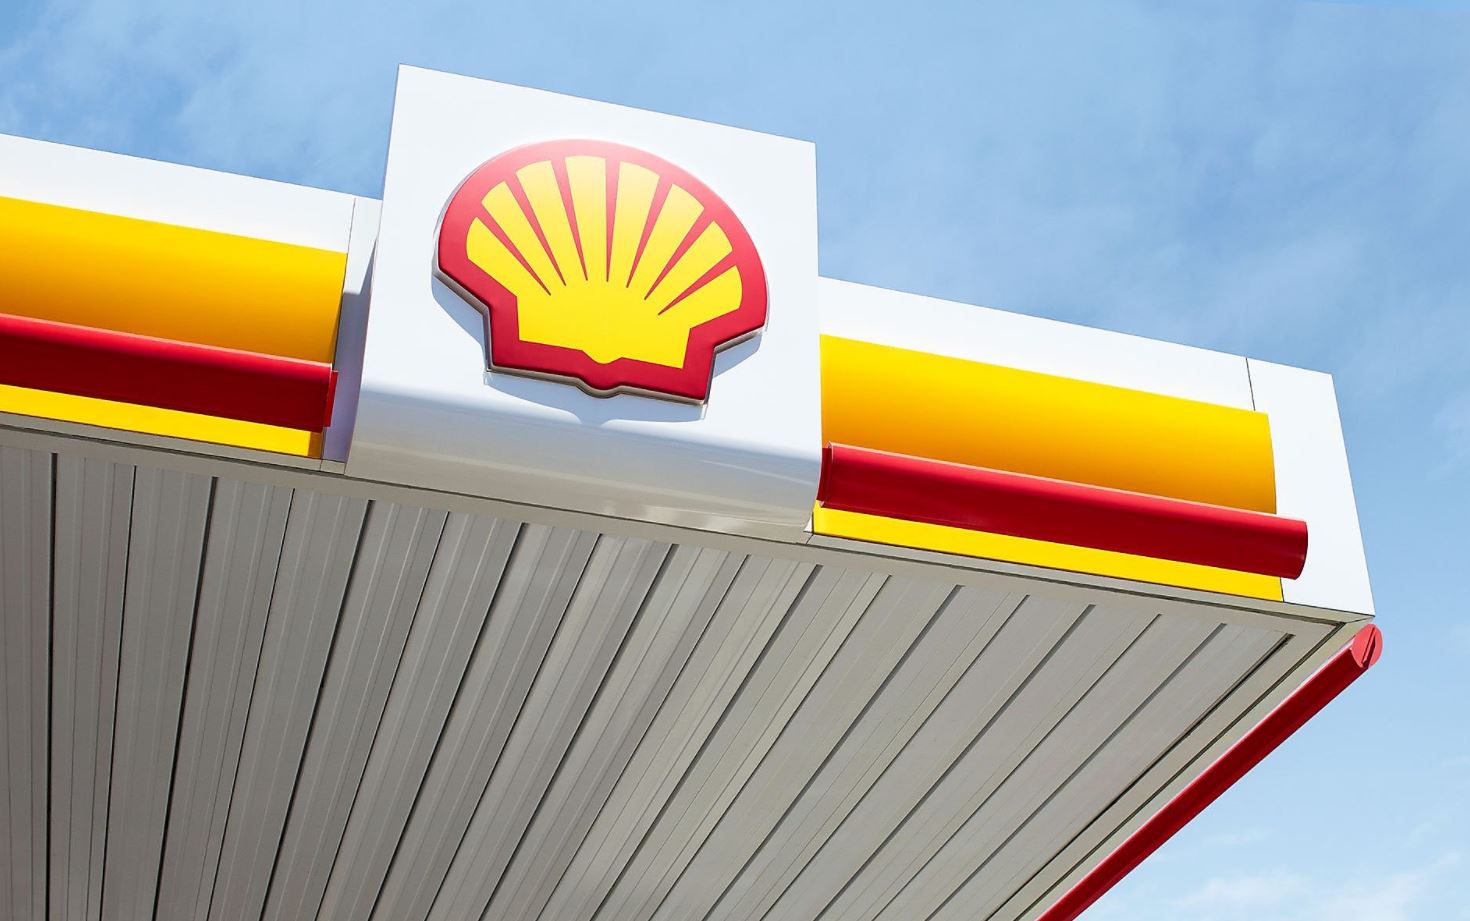 Shell launches investigation after data security incident